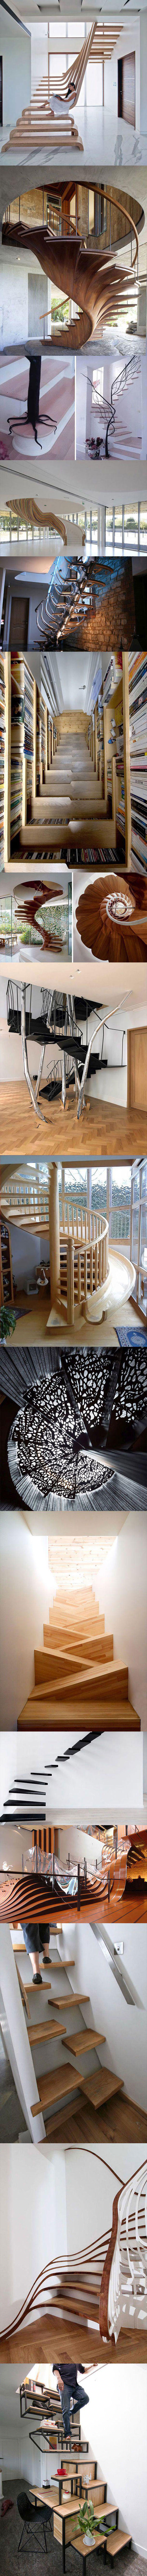 I have a staircase fetish, apparently.